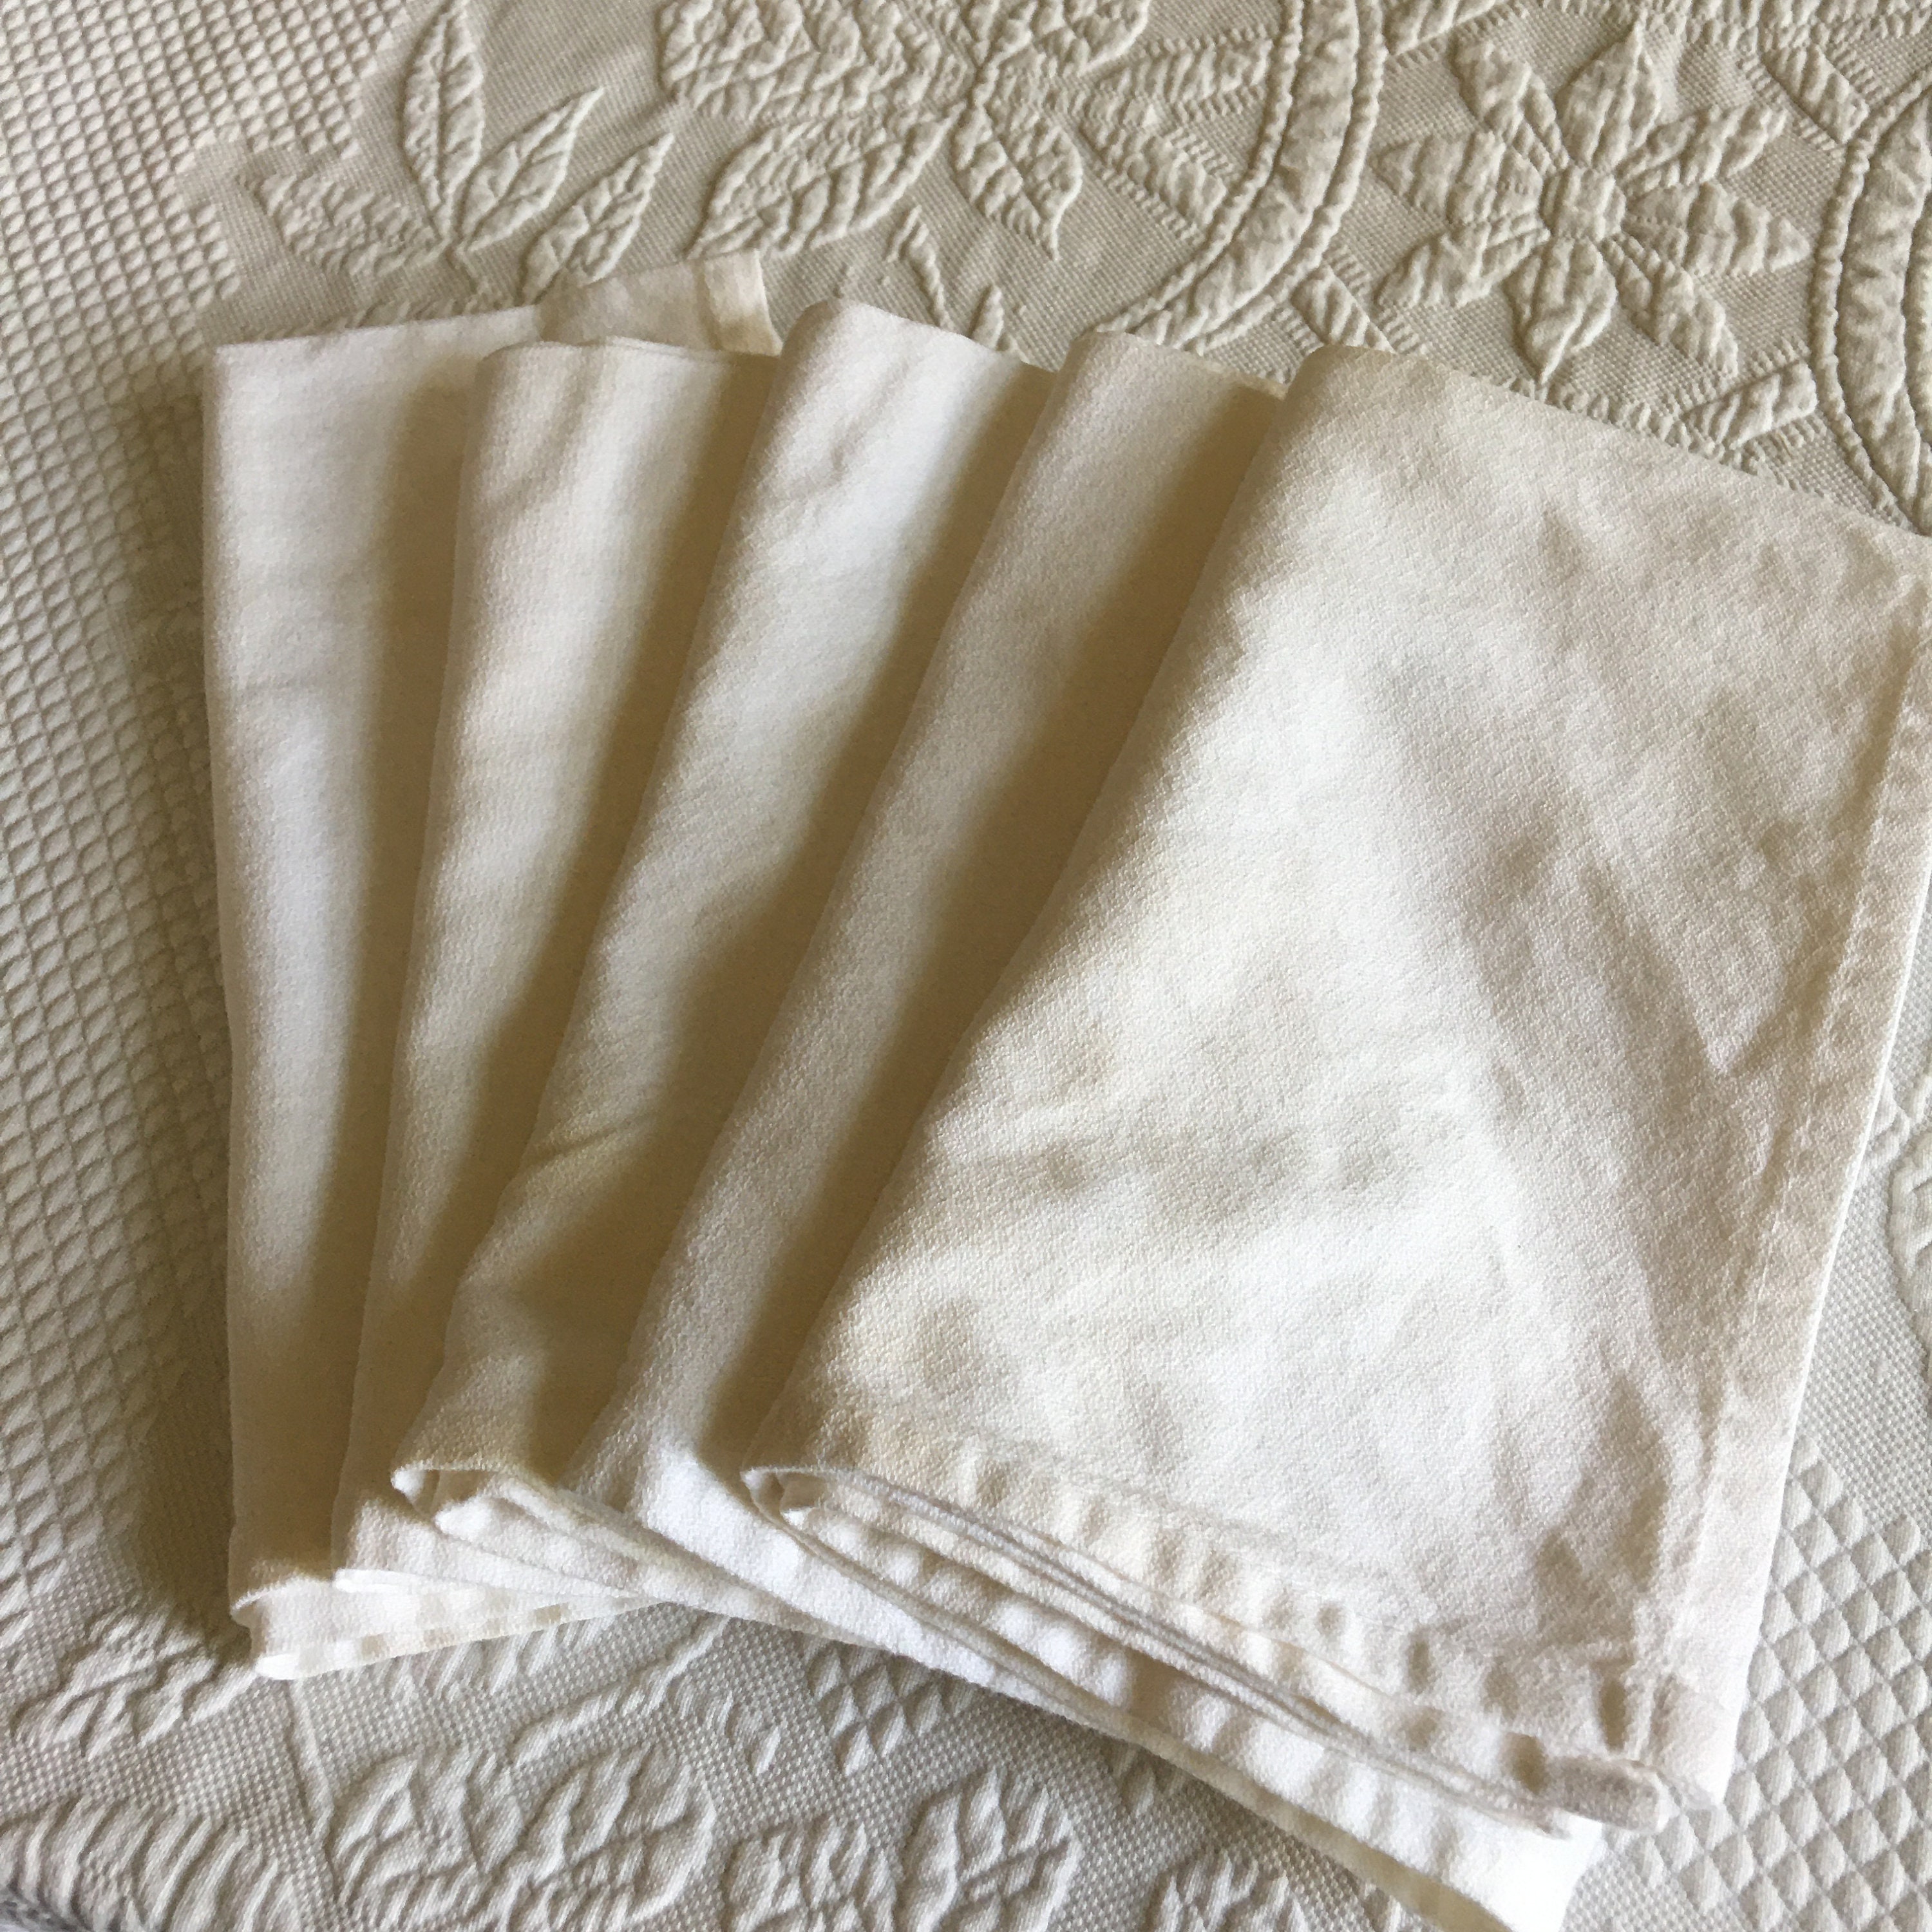  MLMW Thick Cotton Linen Napkins Set of 8 Pack Soft Cloth Dinner  Napkins 17×17 Bulk Rustic Fall Table Napkins for Wedding Party Halloween  Christmas Table Decoration White : Home & Kitchen